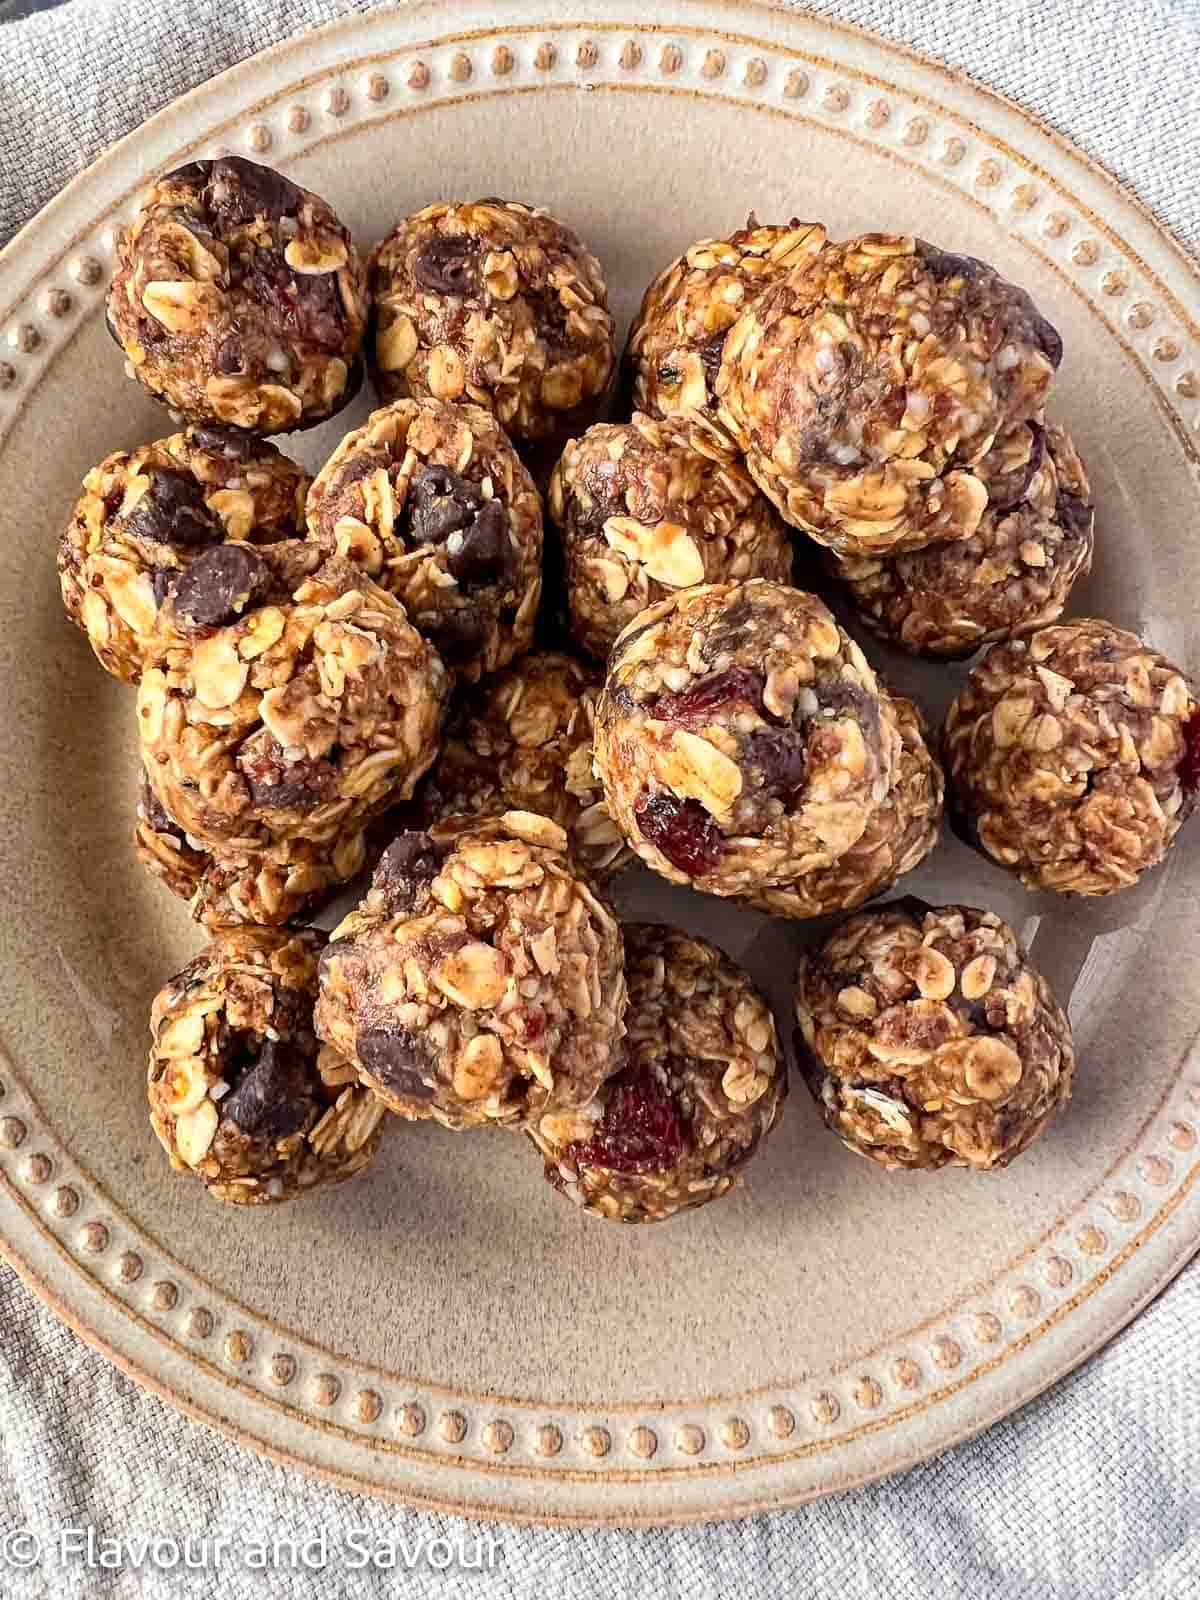 No-bake rolled oats energy balls on a plate.